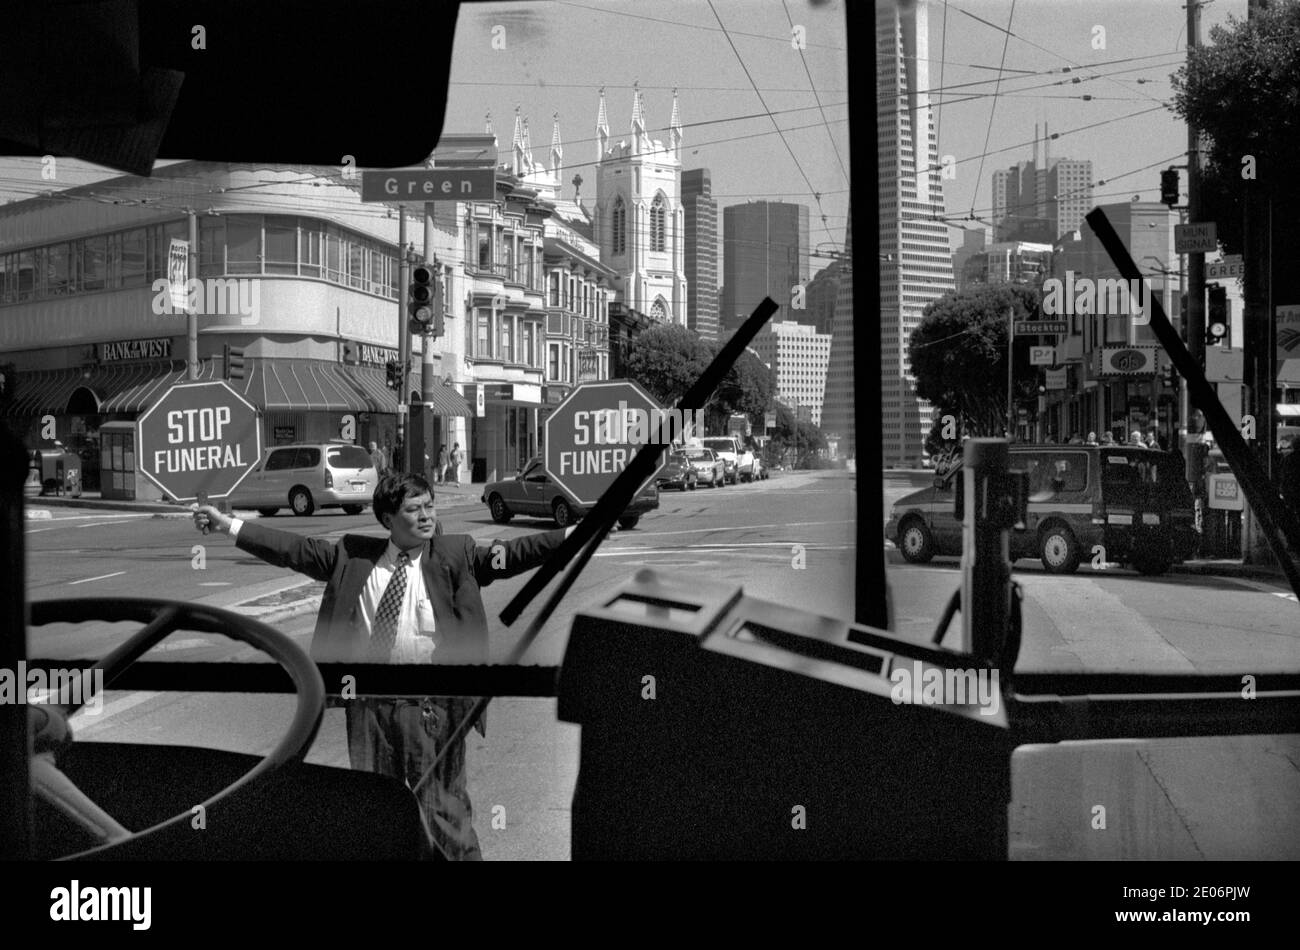 Funeral in progress man holding up a Stop Funeral sign, San Francisco California USA 1999. 1990s taken from inside of a Greyhound bus. HOMER SYKES Stock Photo